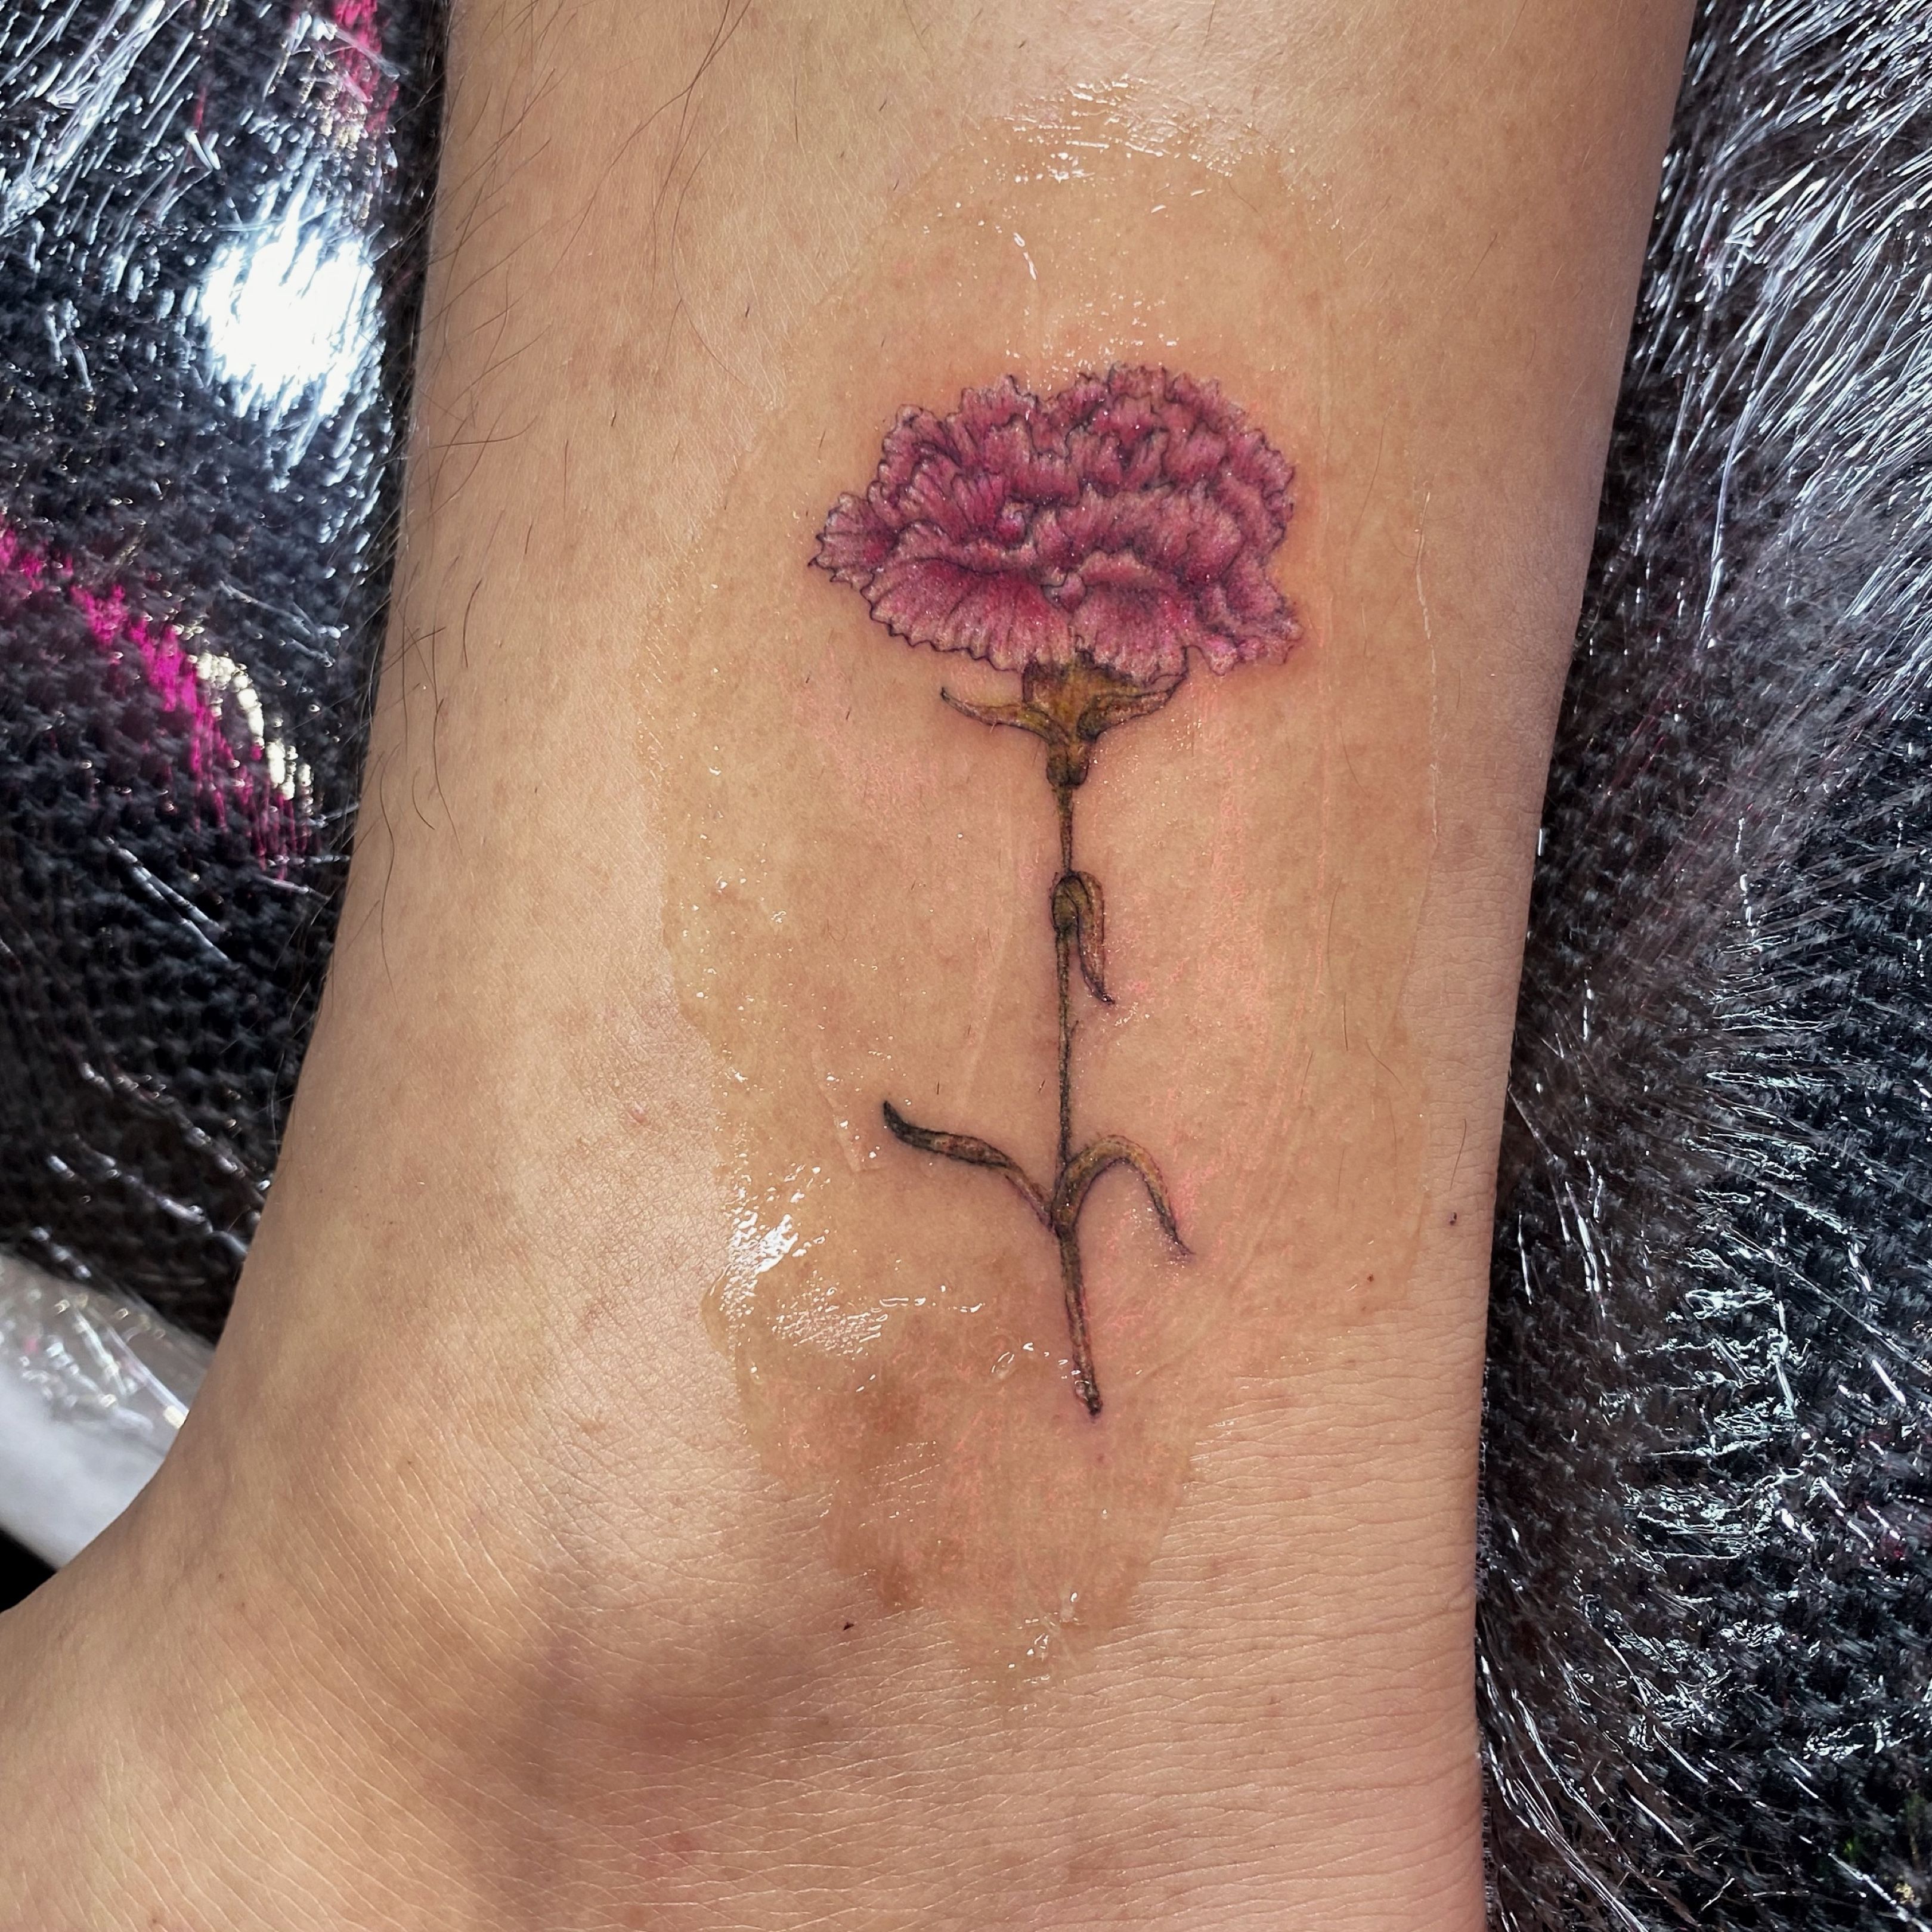 January Birth Month Flower - Black and White Carnation - Carnation tattoo